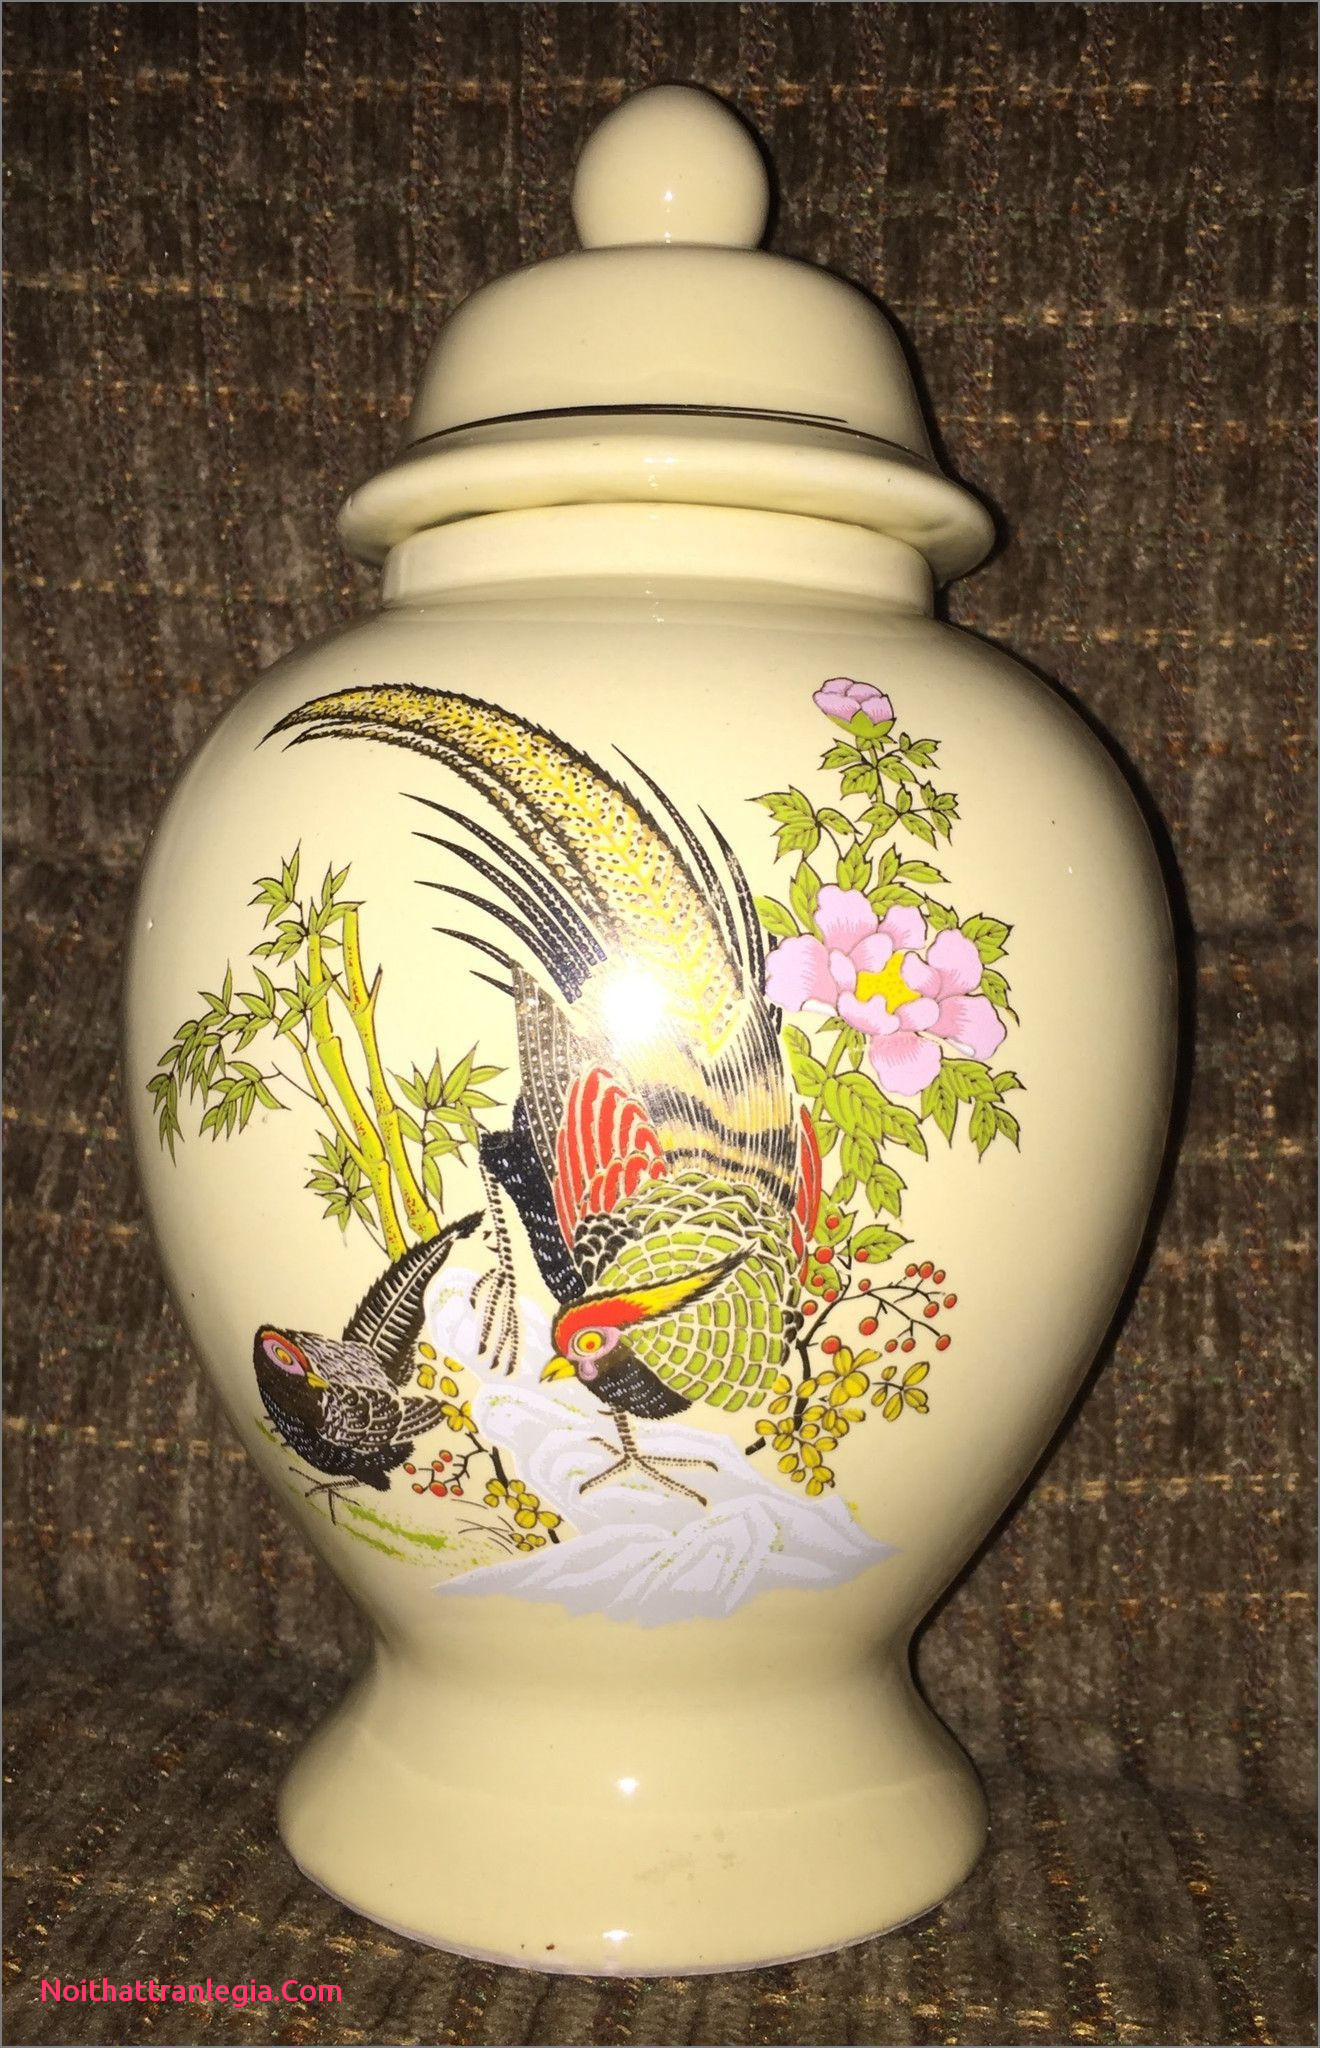 19 Unique Hand Painted Floor Vase 2024 free download hand painted floor vase of 20 chinese antique vase noithattranlegia vases design with vintage collectible asian vase jar hand painted two birds bamboo and flowers